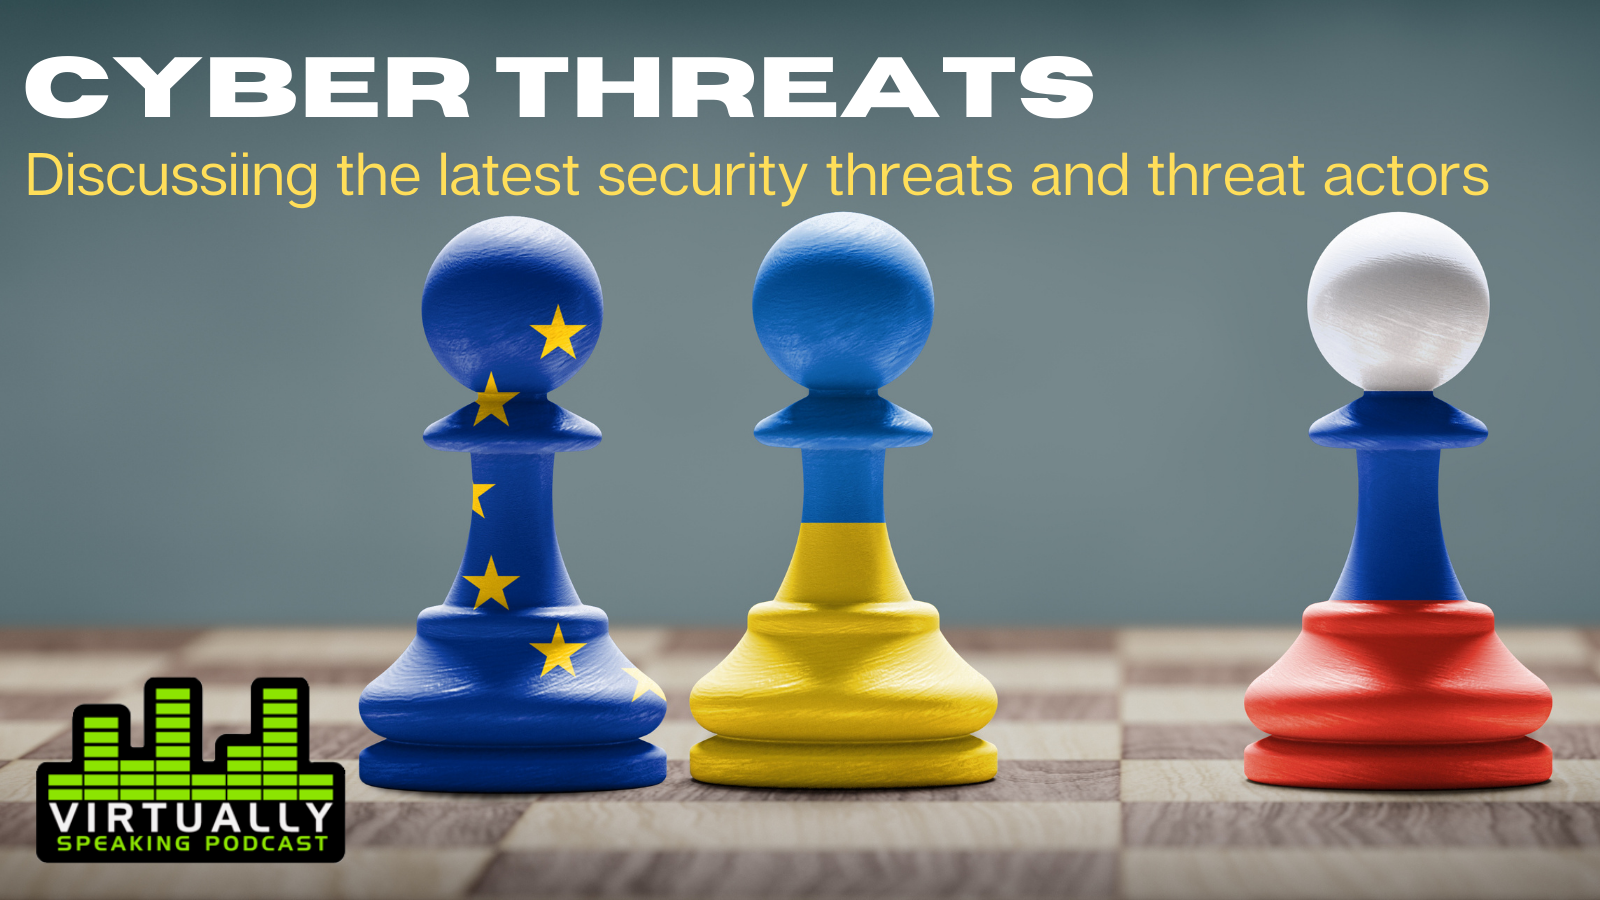 Cyber Threats: Discussing the latest security threats and threat actors